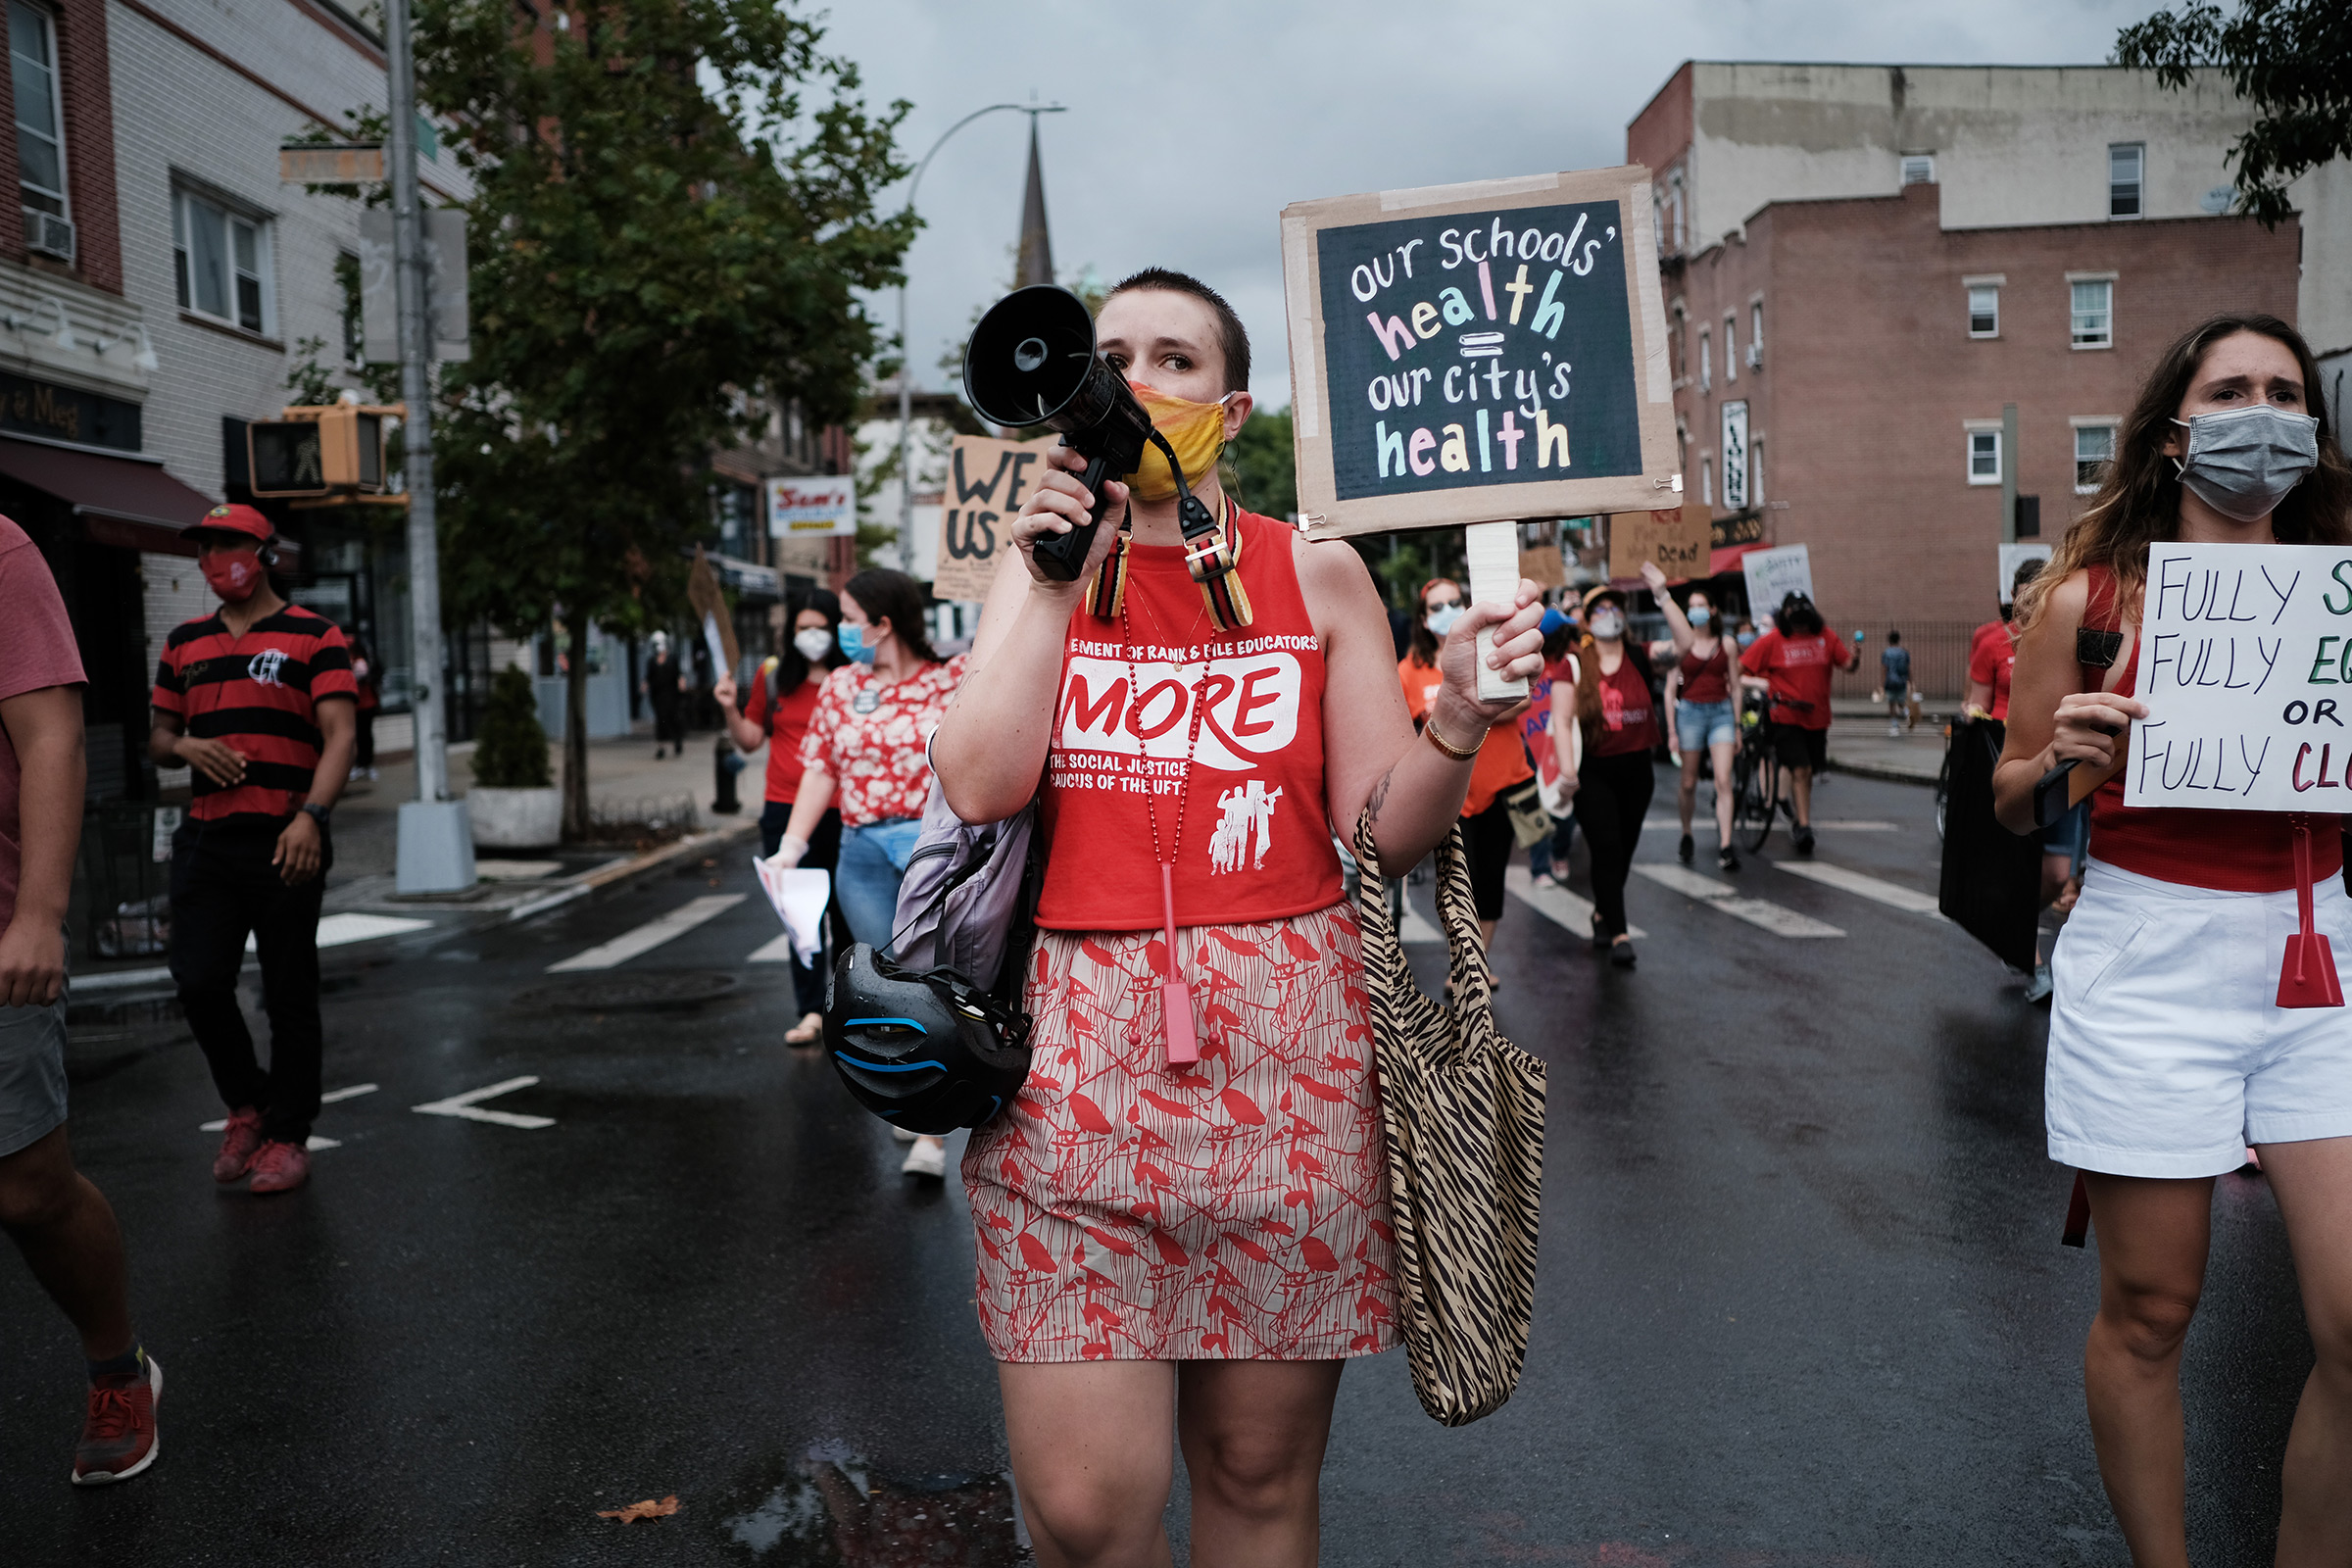 Members of the teachers union, parents and students participate in a march through Brooklyn, N.Y. to demand a safer teaching environment for themselves and for students during the Covid-19 pandemic on Sept. 1, 2020.